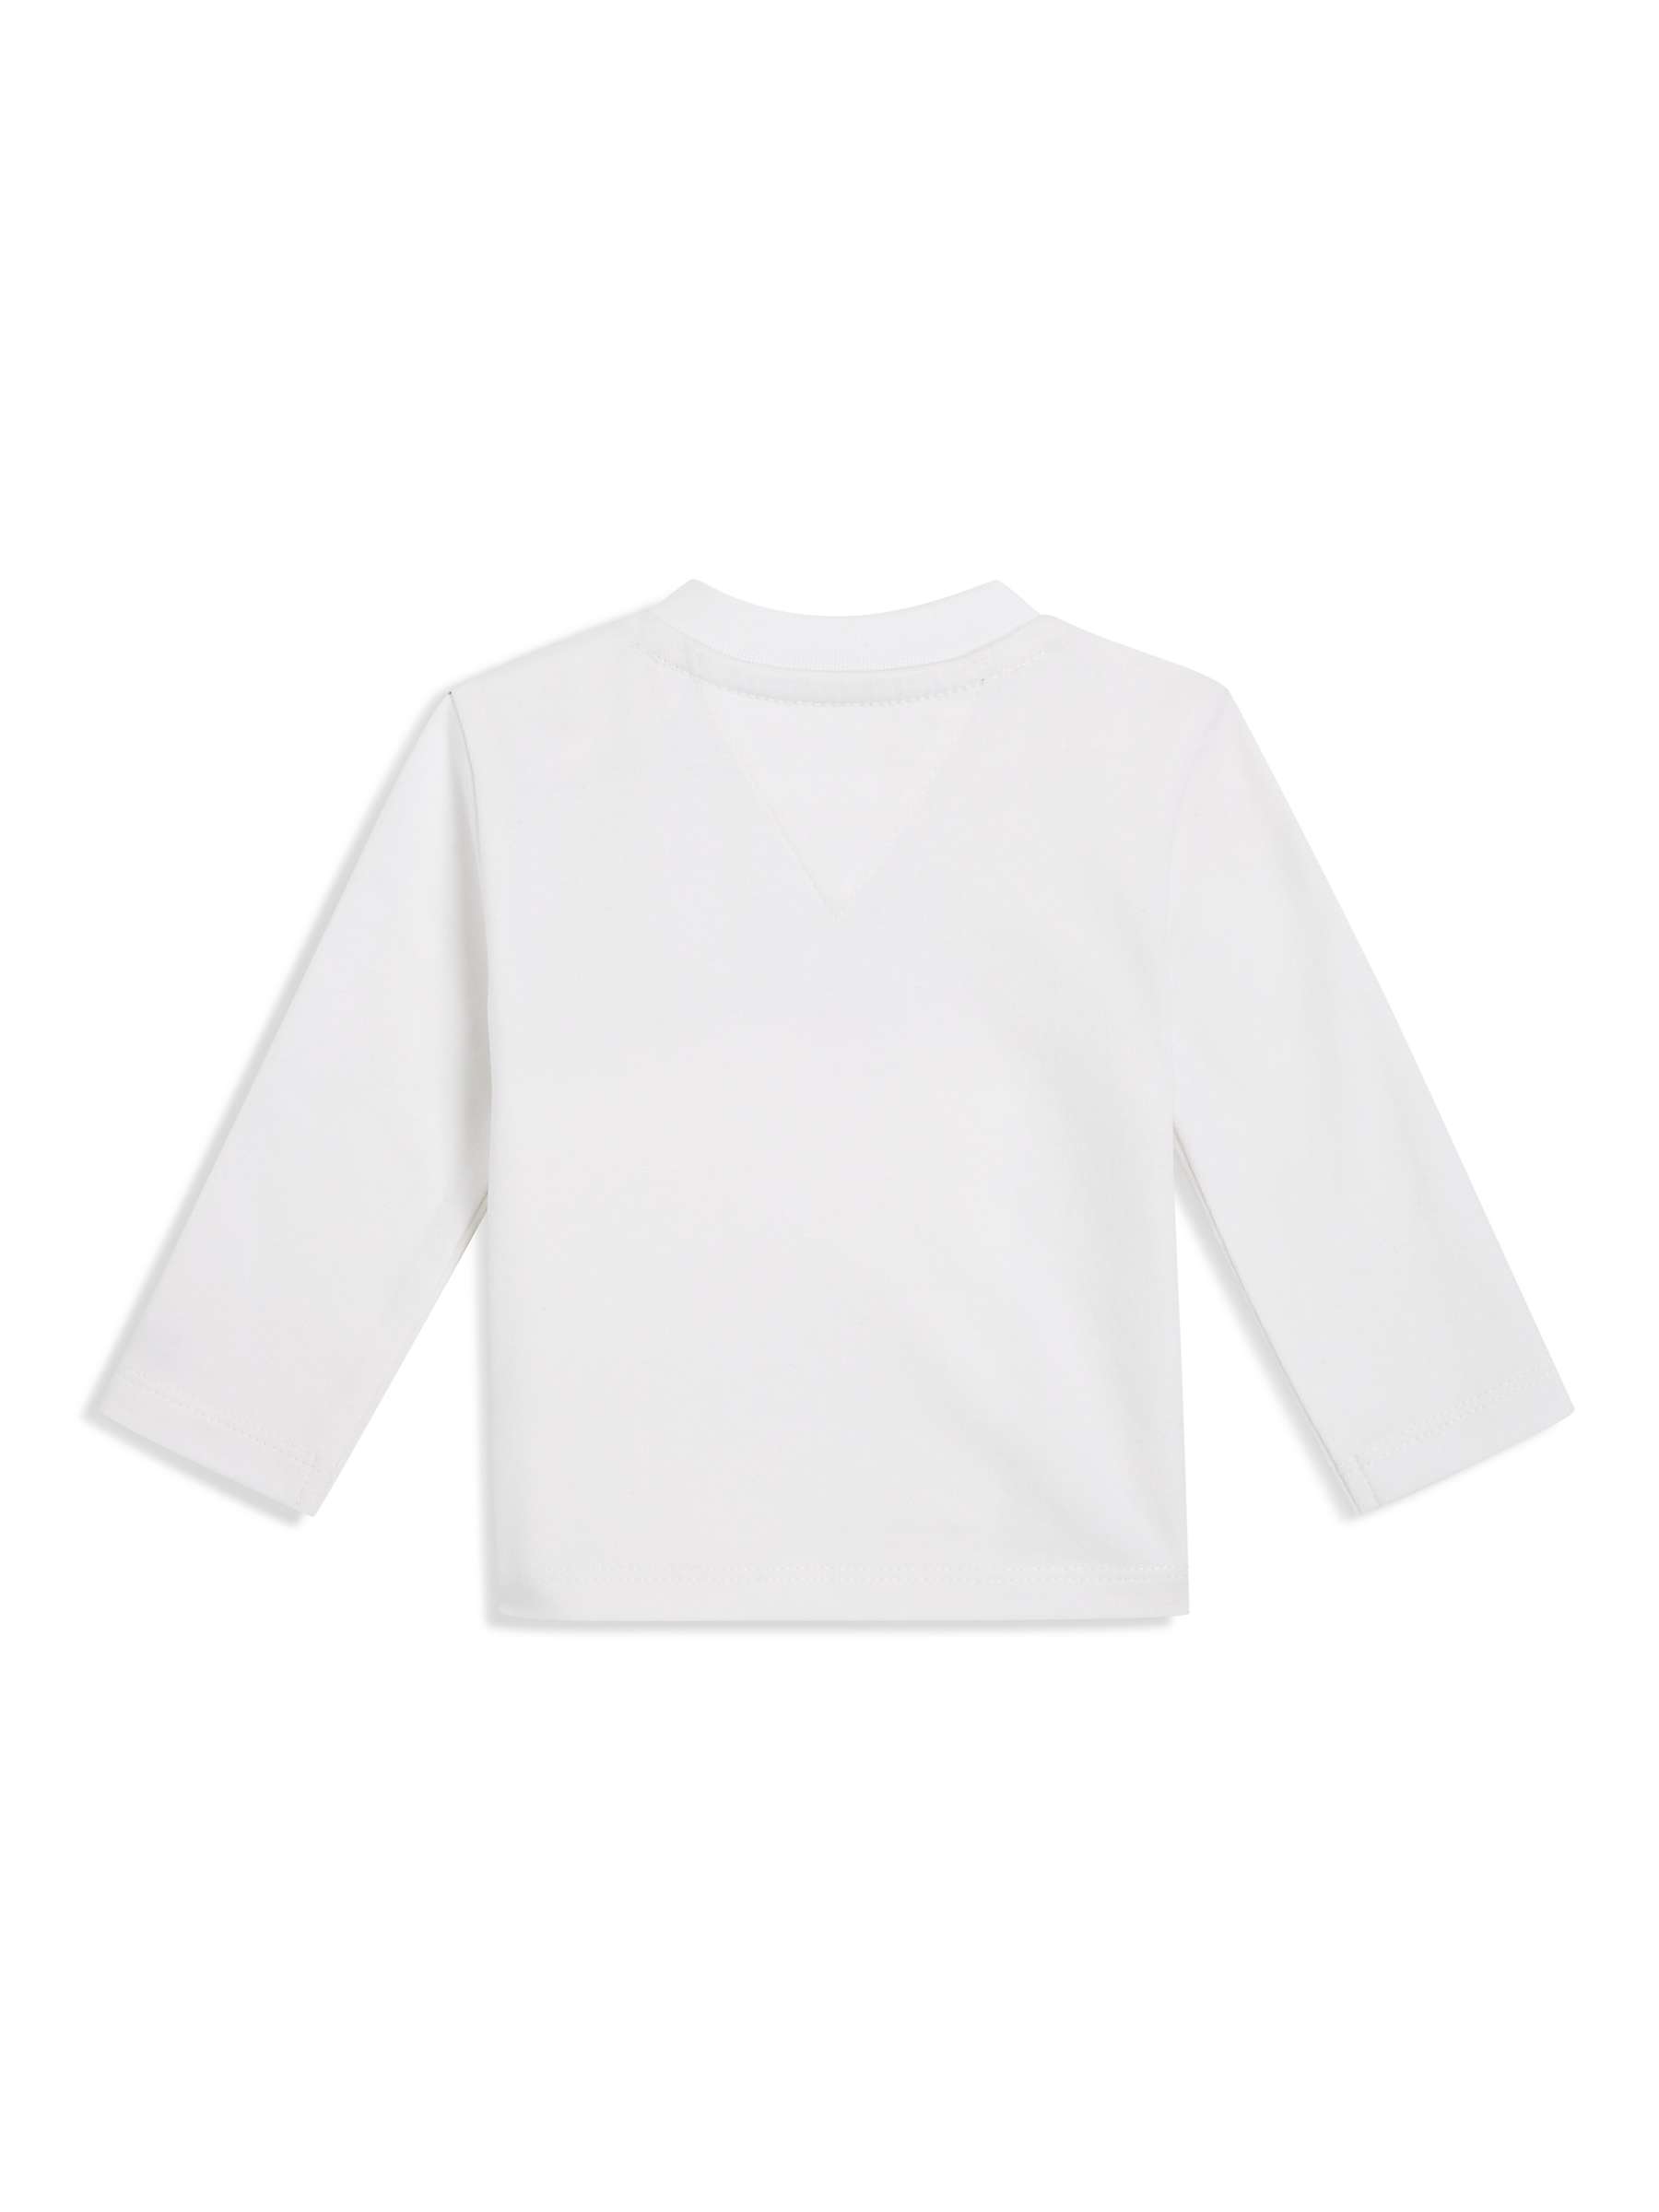 Buy Tommy Hilfiger Baby Logo Long Sleeve T-Shirt, White Online at johnlewis.com